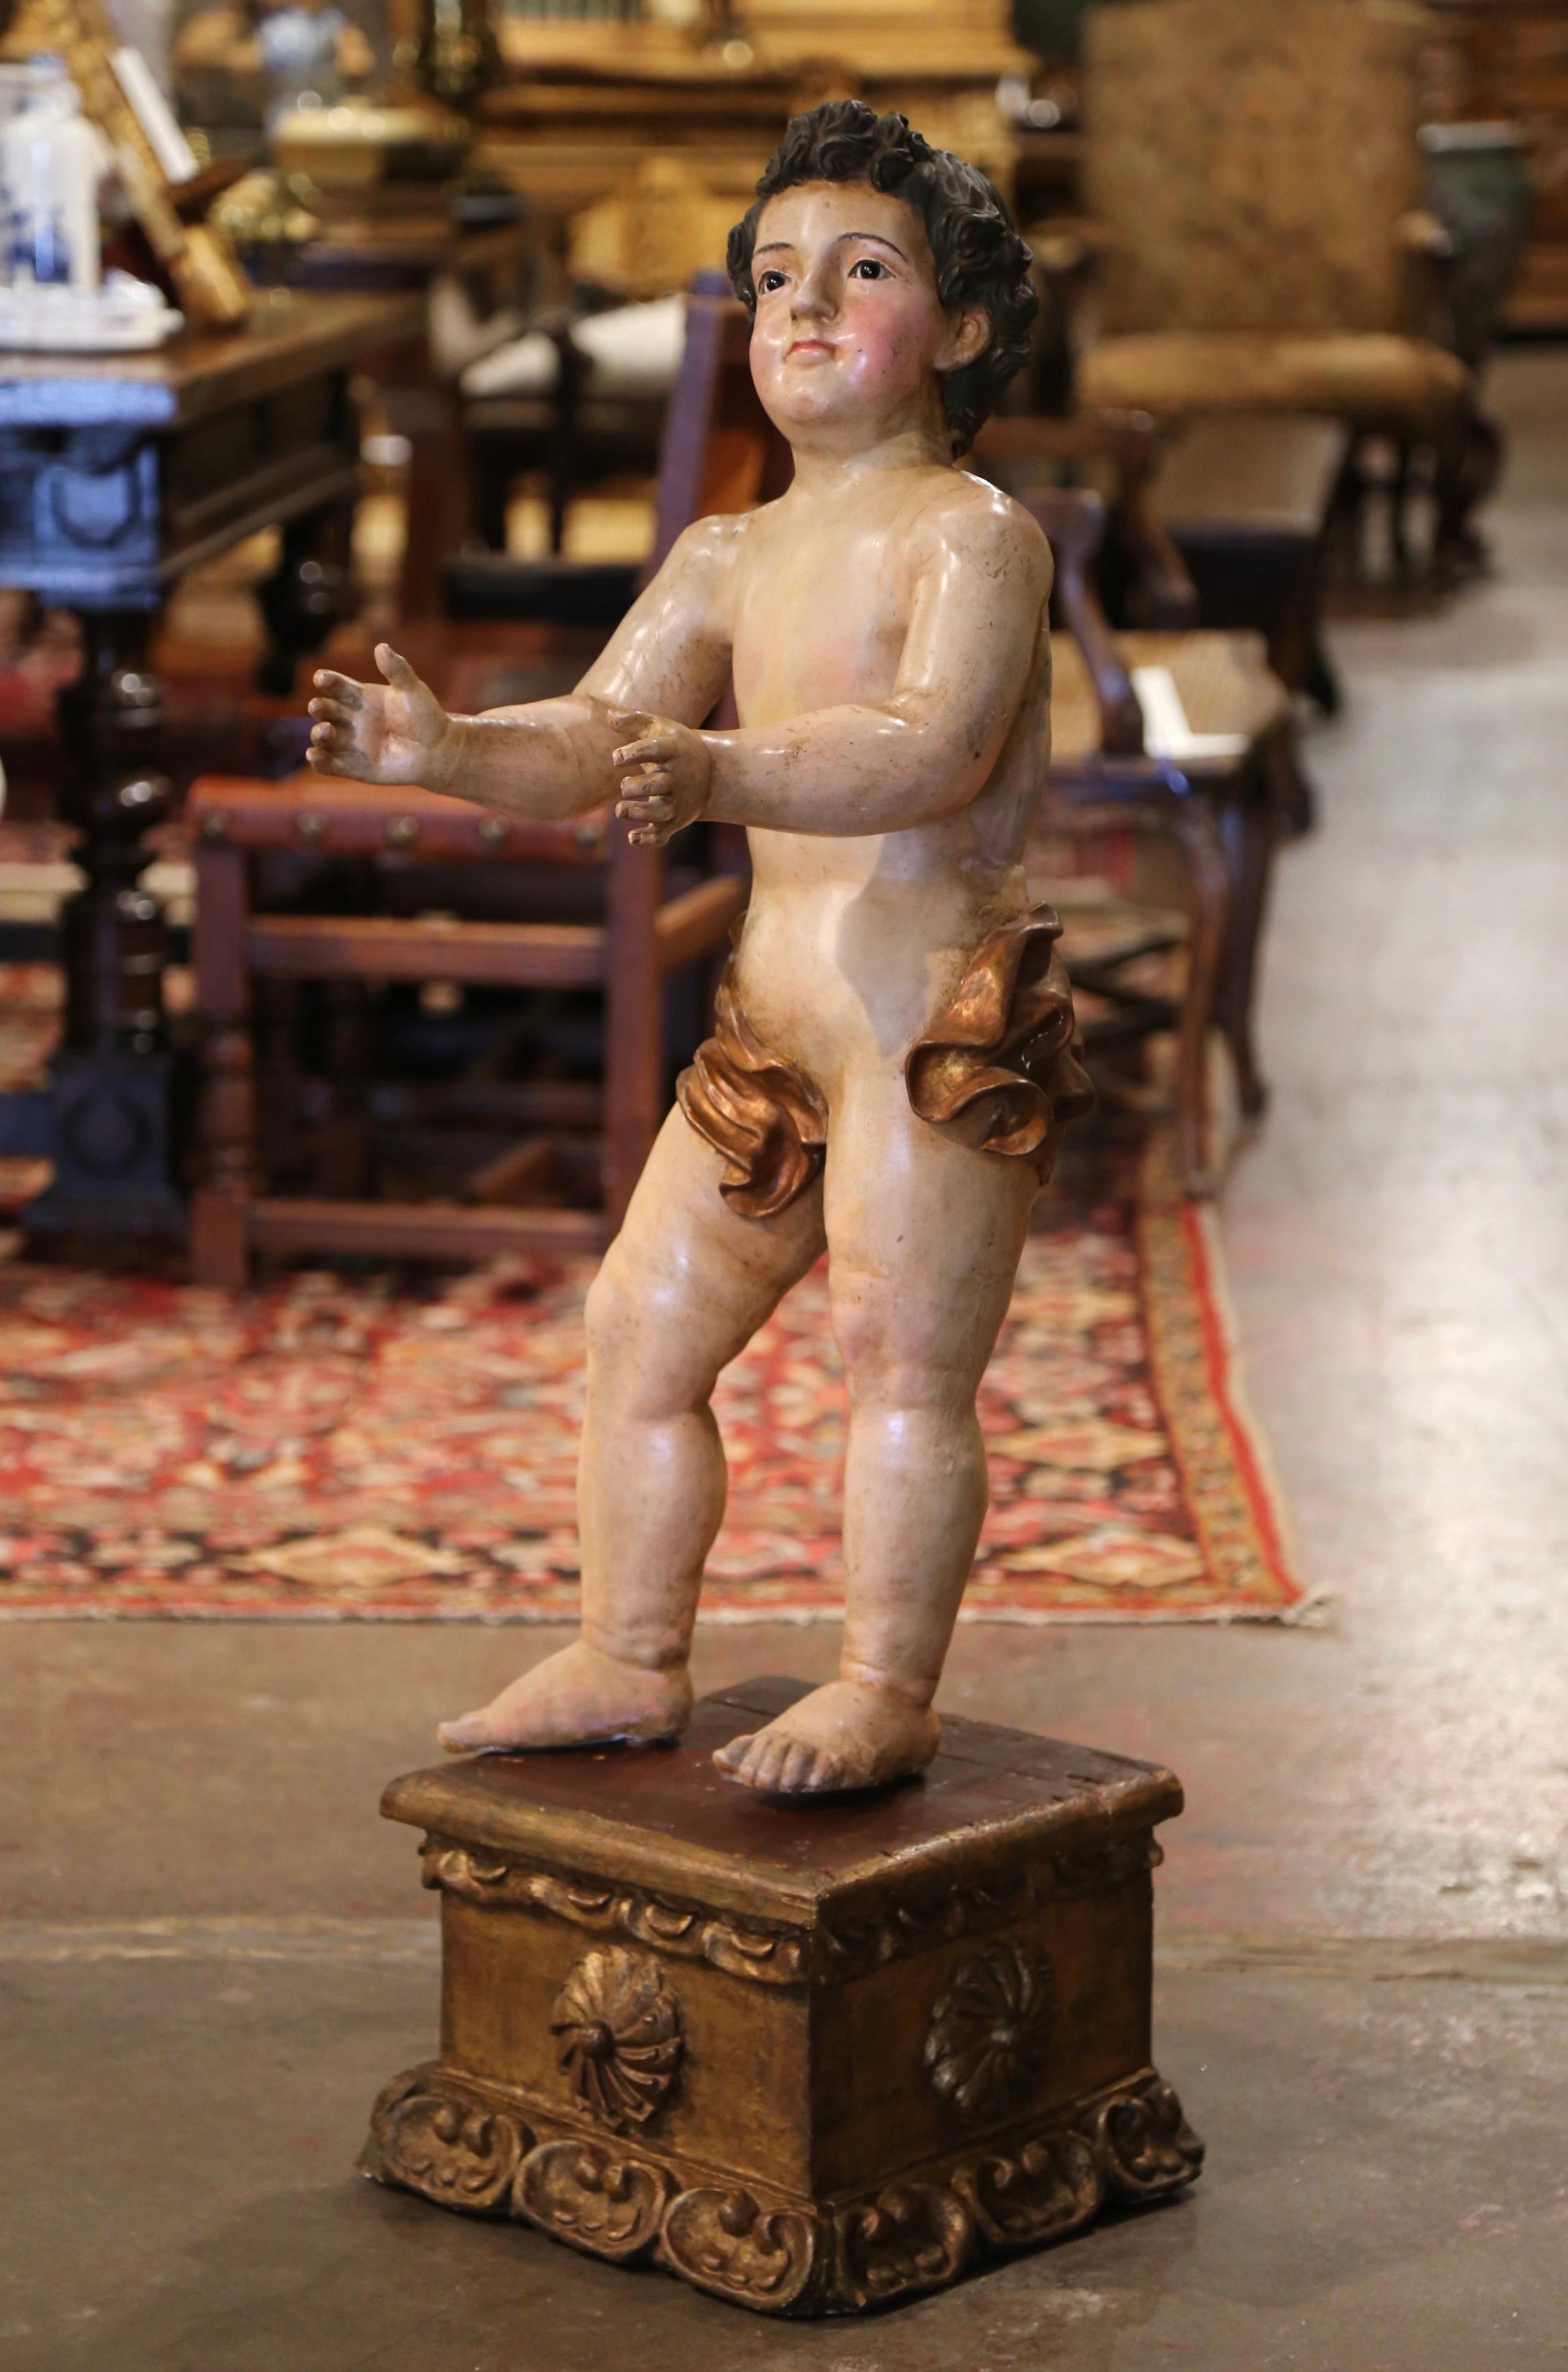 Hand crafted in Italy circa 1780, the antique cherub stands on a square base decorated with shell and foliage motifs. The hand carved sculpture depicts a life size young boy wearing a cloth around his waist, his arms extending and looking up; he is